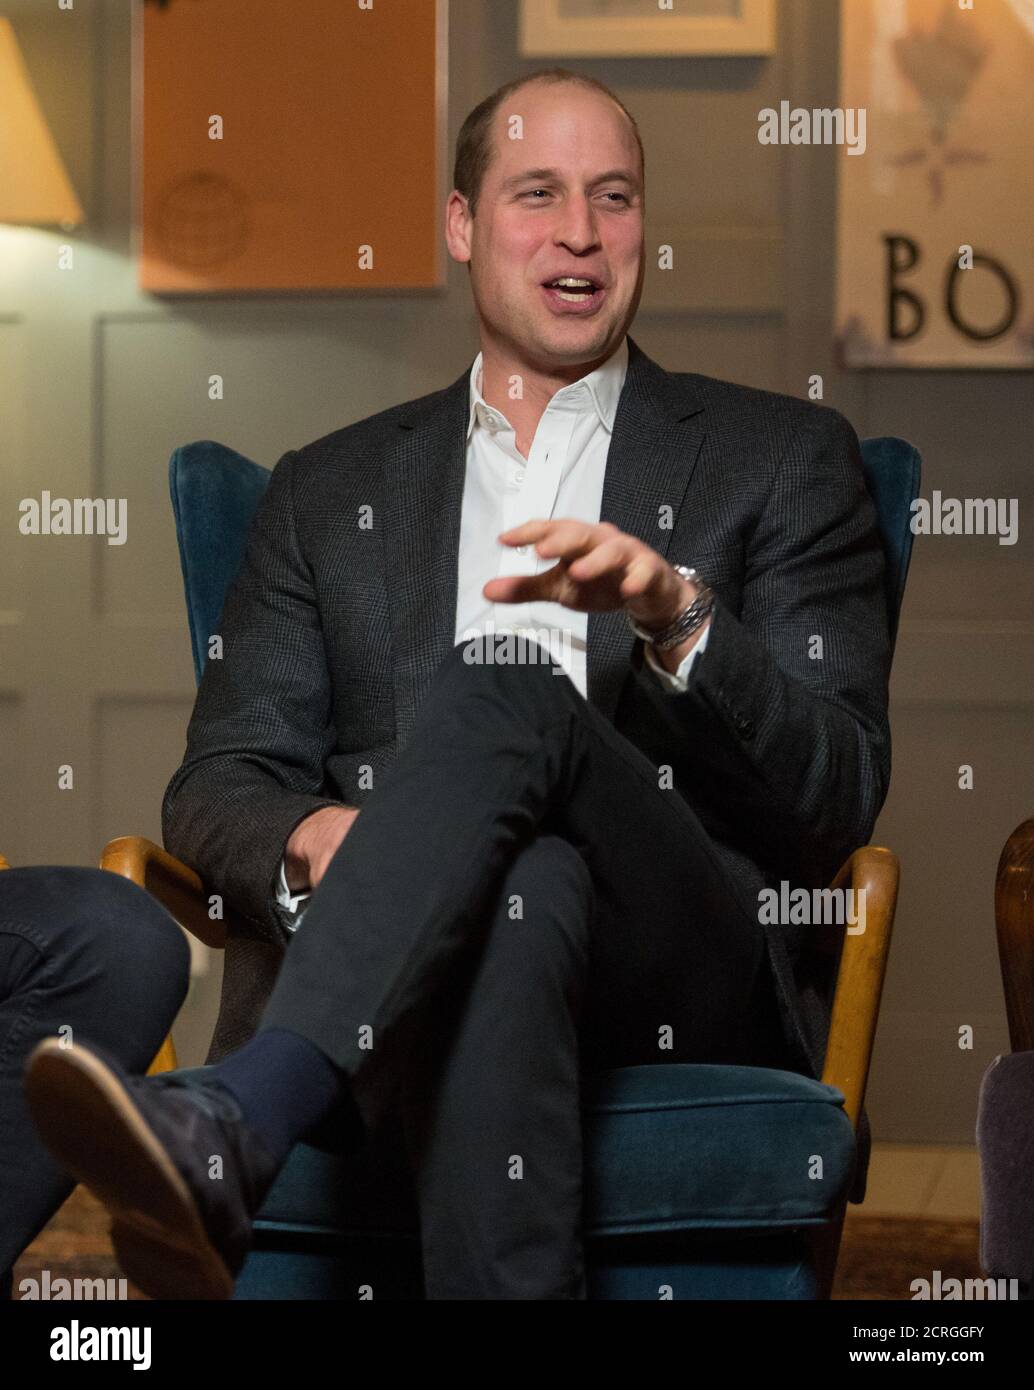 The Duke of Cambridge talks during a visit to meet staff, volunteers, and supporters of 'Campaign Against Living Miserably' (CALM), a charity dedicated to preventing male suicide, to lend his support to their 'Best Man Project' at High Road House, London, Britain January 10, 2018. REUTERS/Dominic Lipinski/Pool Stock Photo